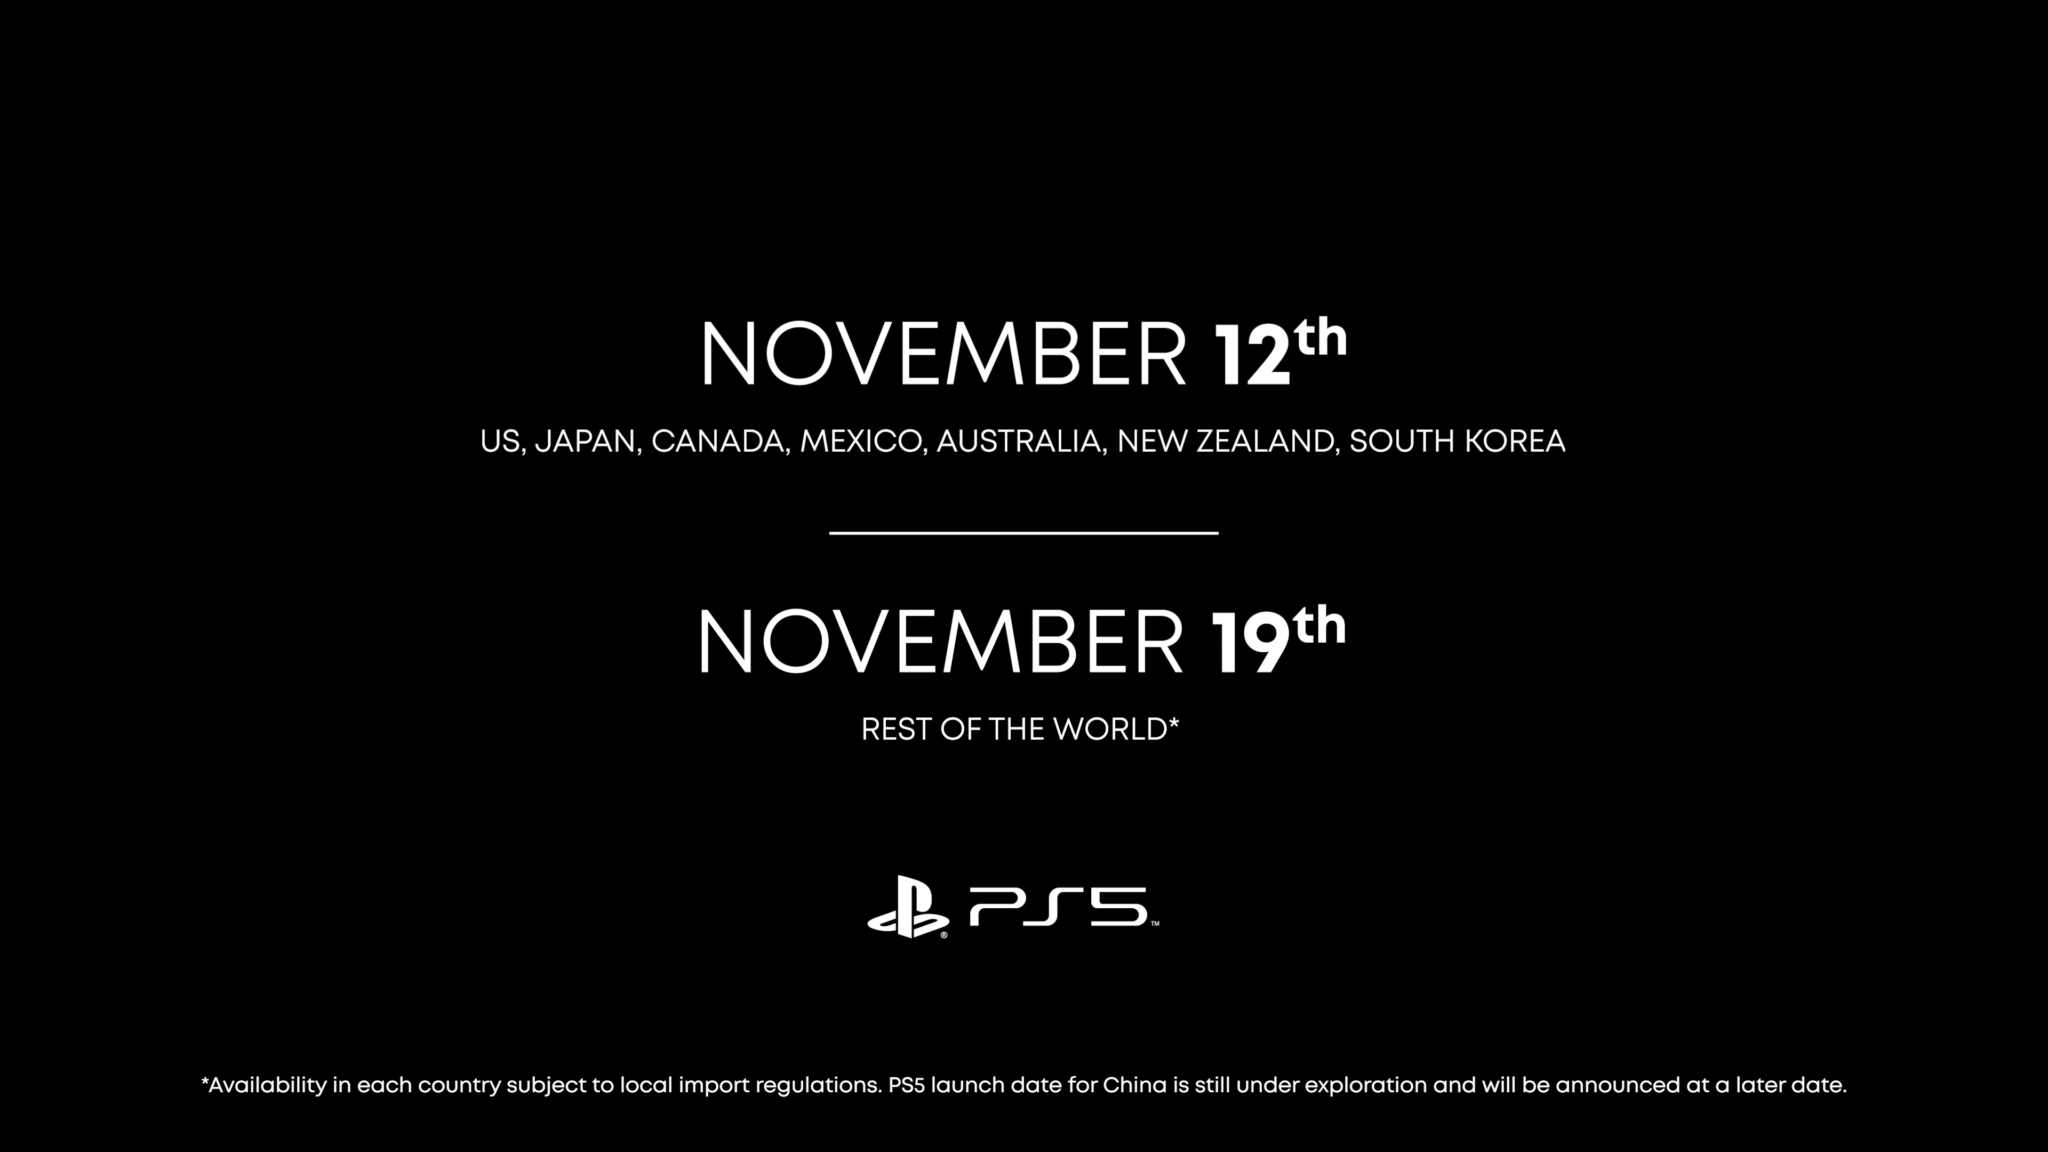 Sony PS5 launching in November